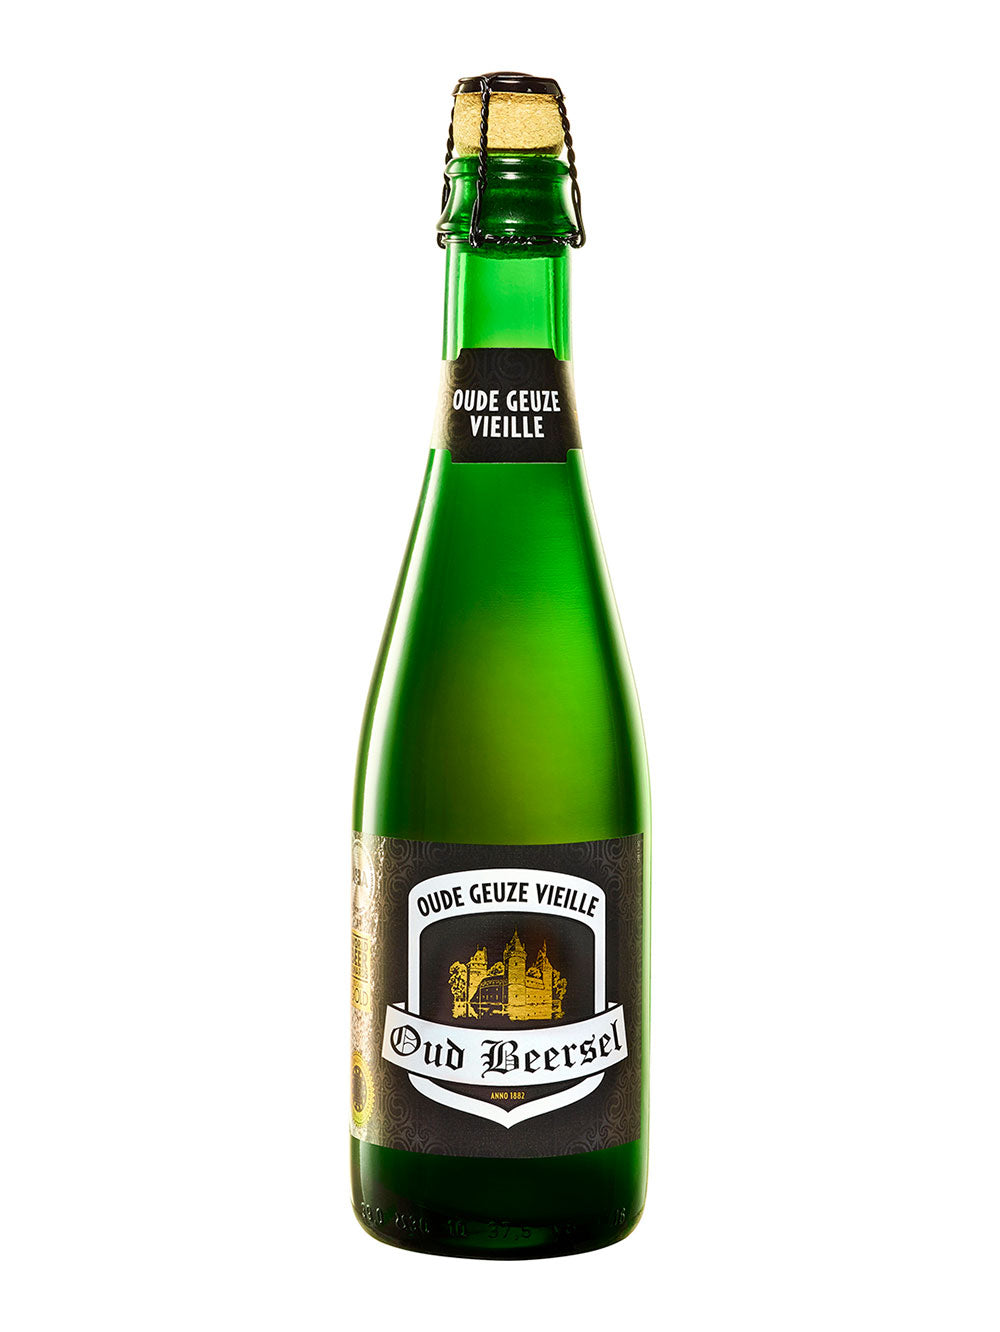 Oud Beersel- Oude Geuze (Vieille) Lambic 6% ABV 750ml Bottle